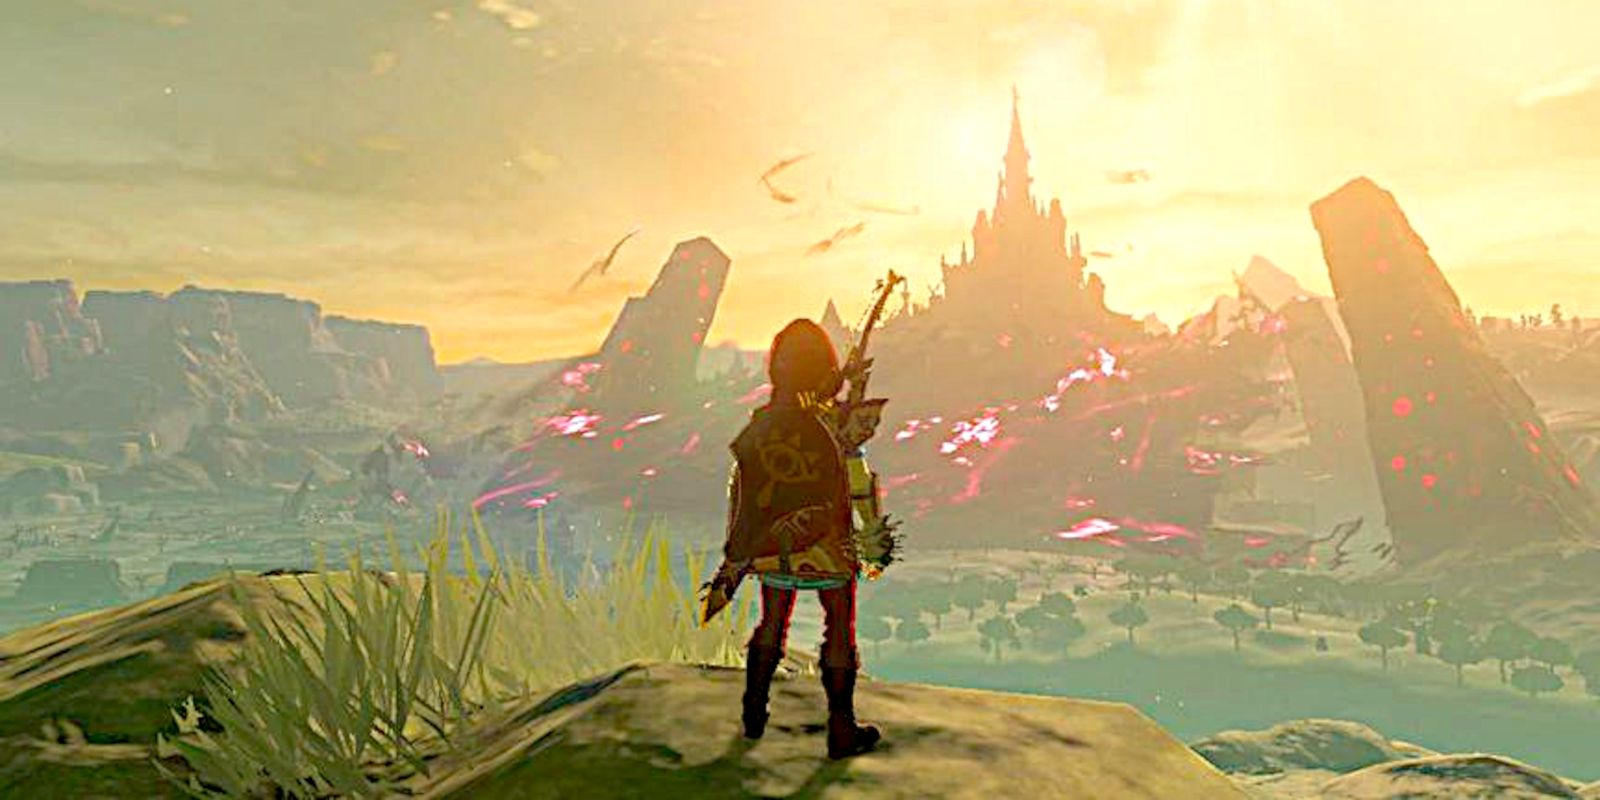 15 Incredible Games Similar to The Legend of Zelda That Deserve Your Attention